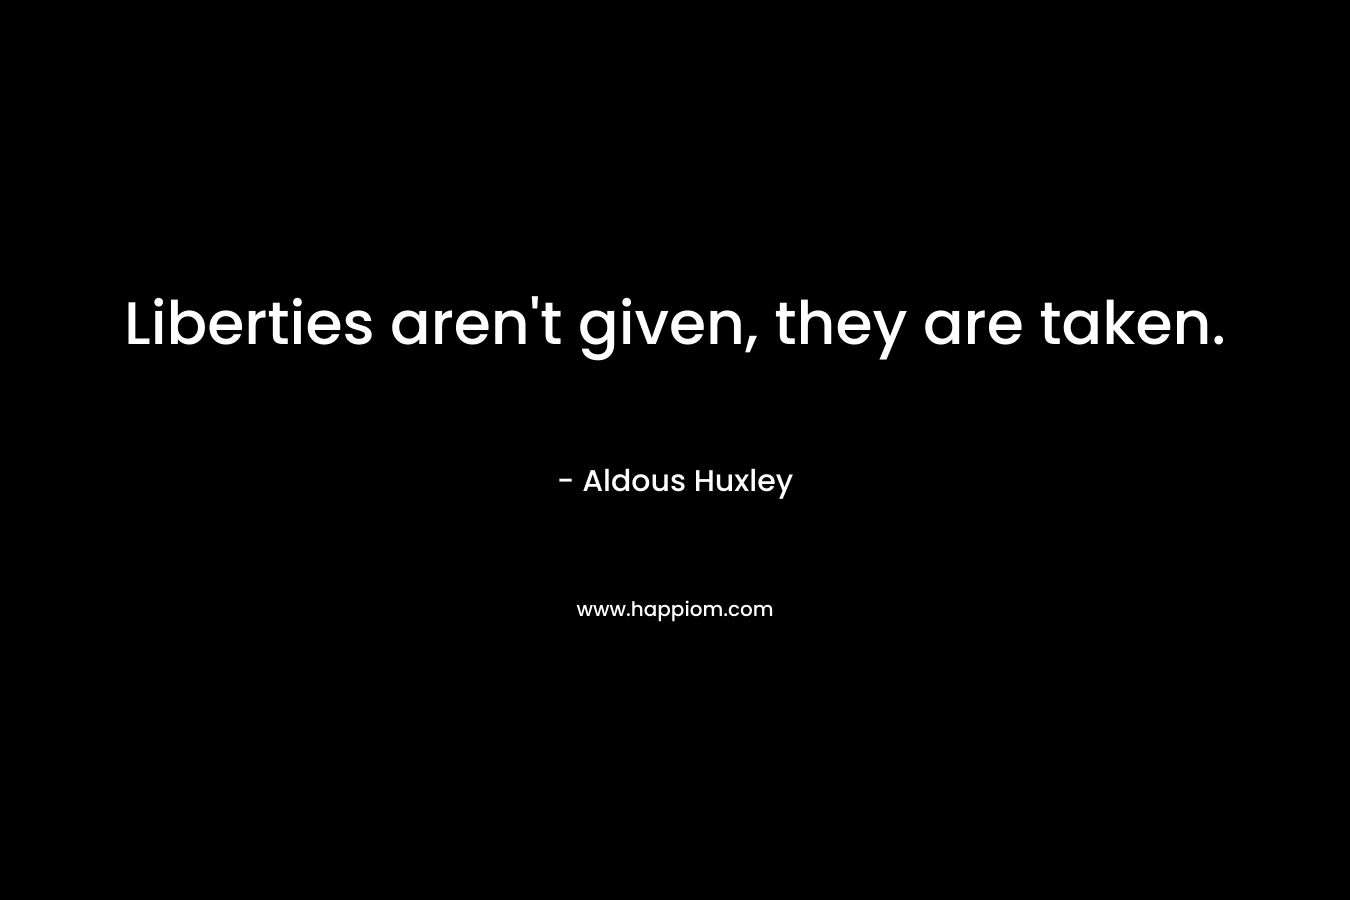 Liberties aren’t given, they are taken. – Aldous Huxley